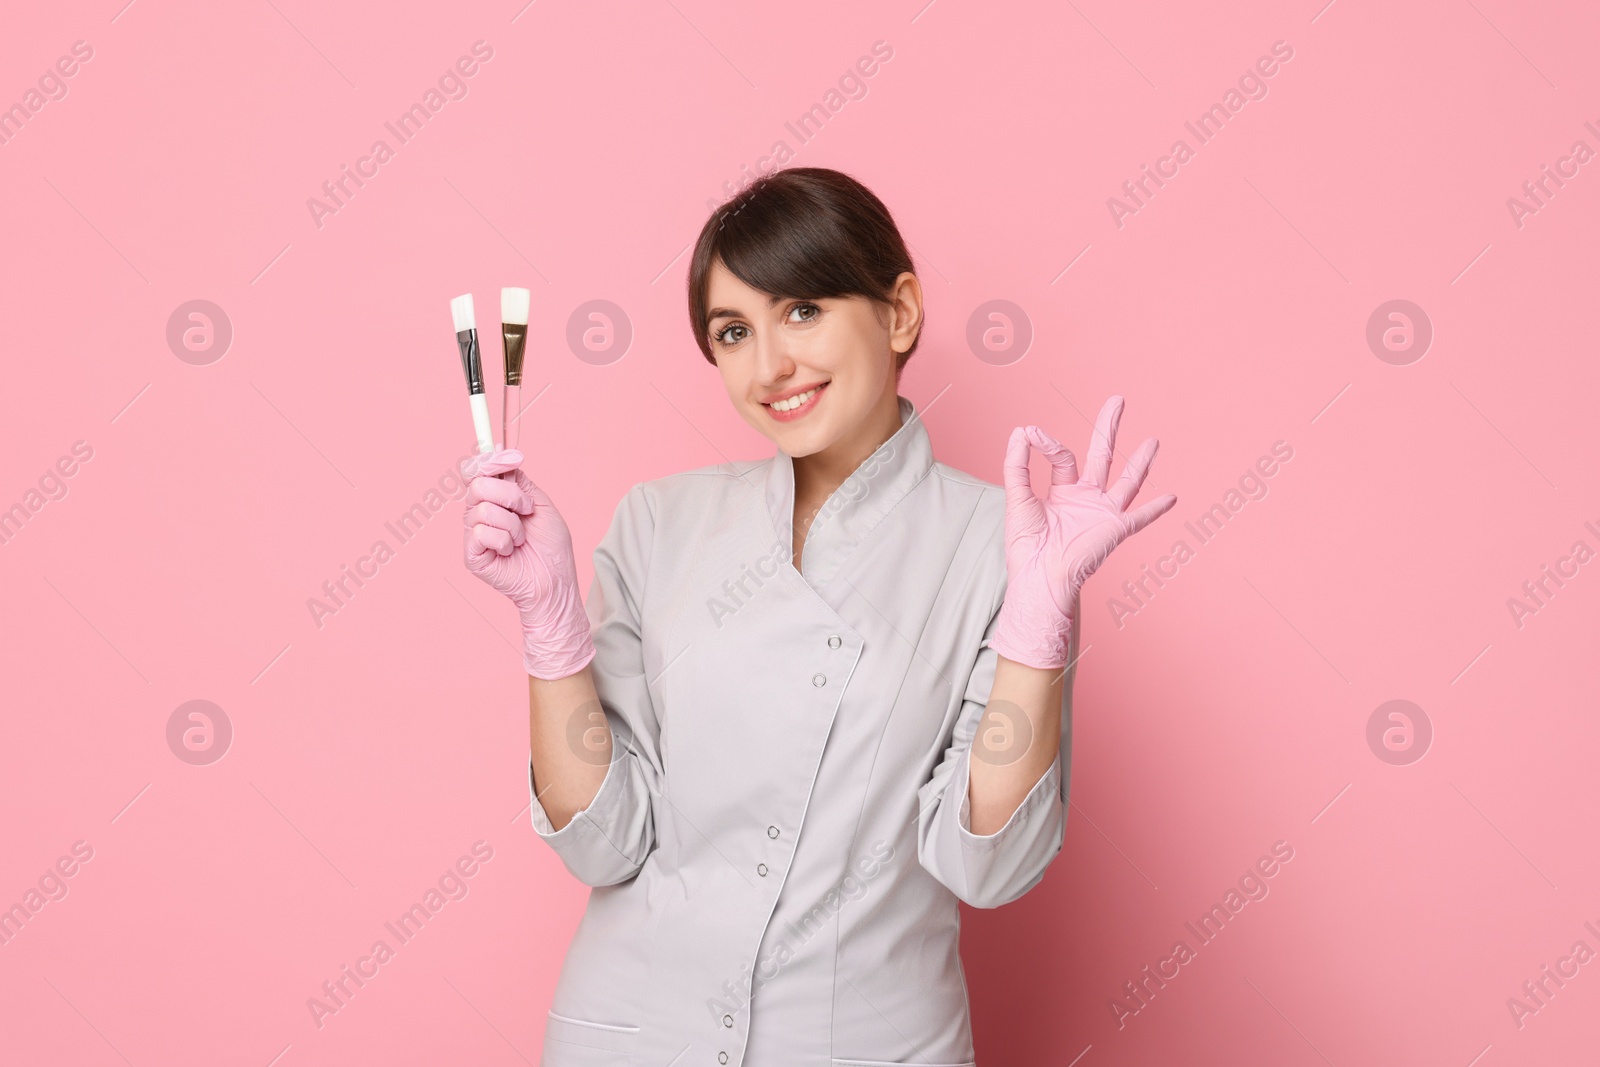 Photo of Cosmetologist with cosmetic brushes showing OK gesture on pink background